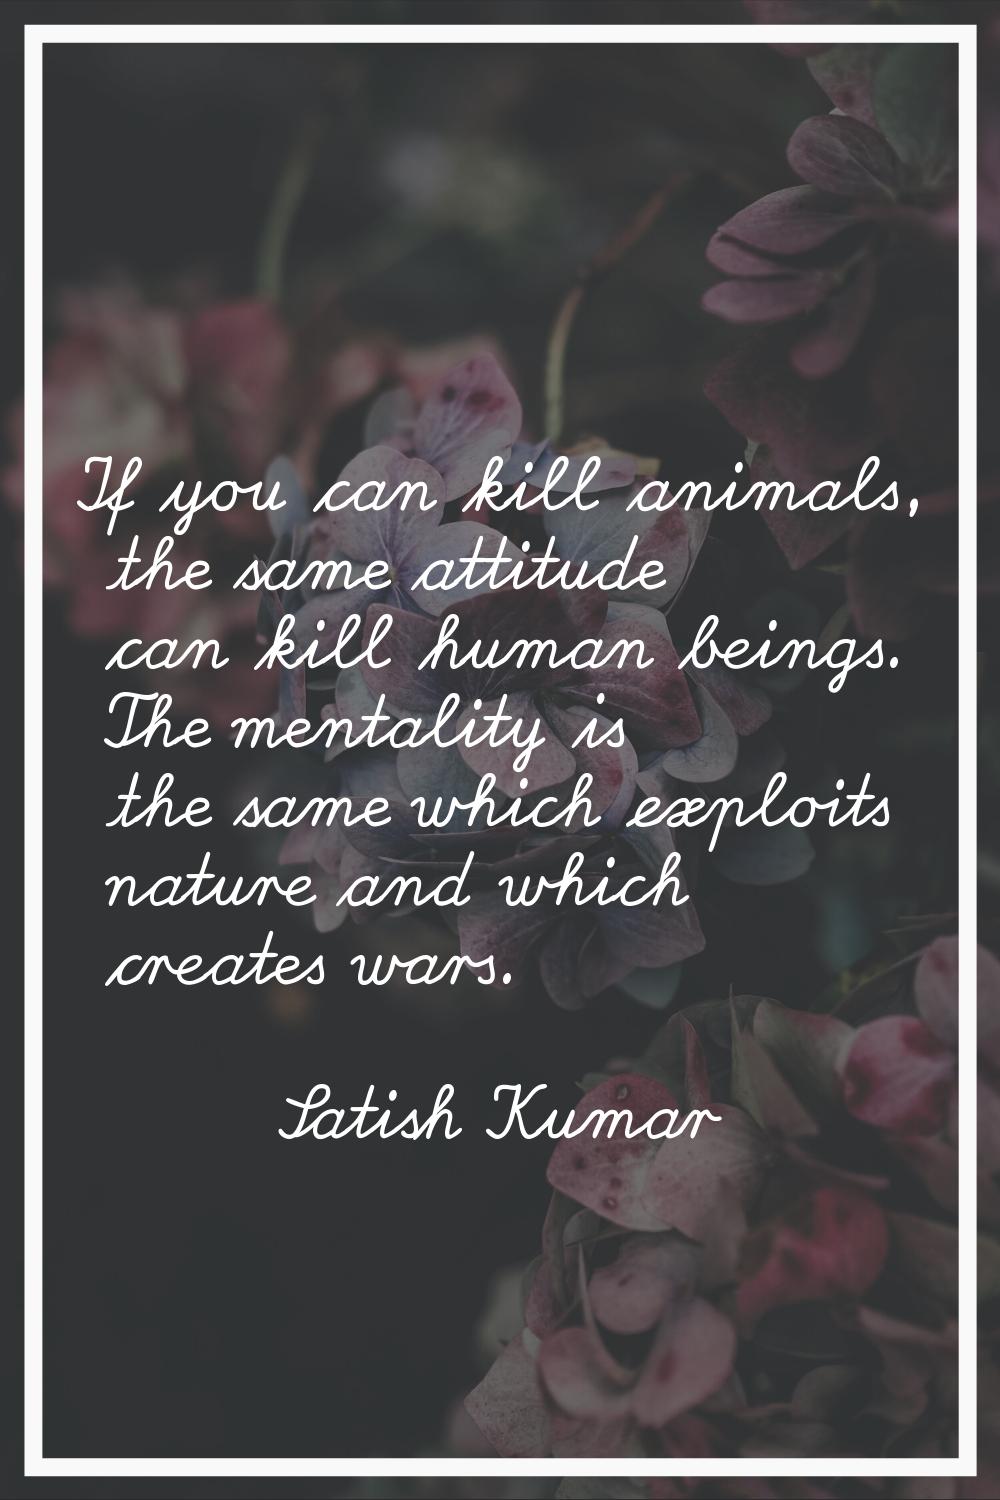 If you can kill animals, the same attitude can kill human beings. The mentality is the same which e